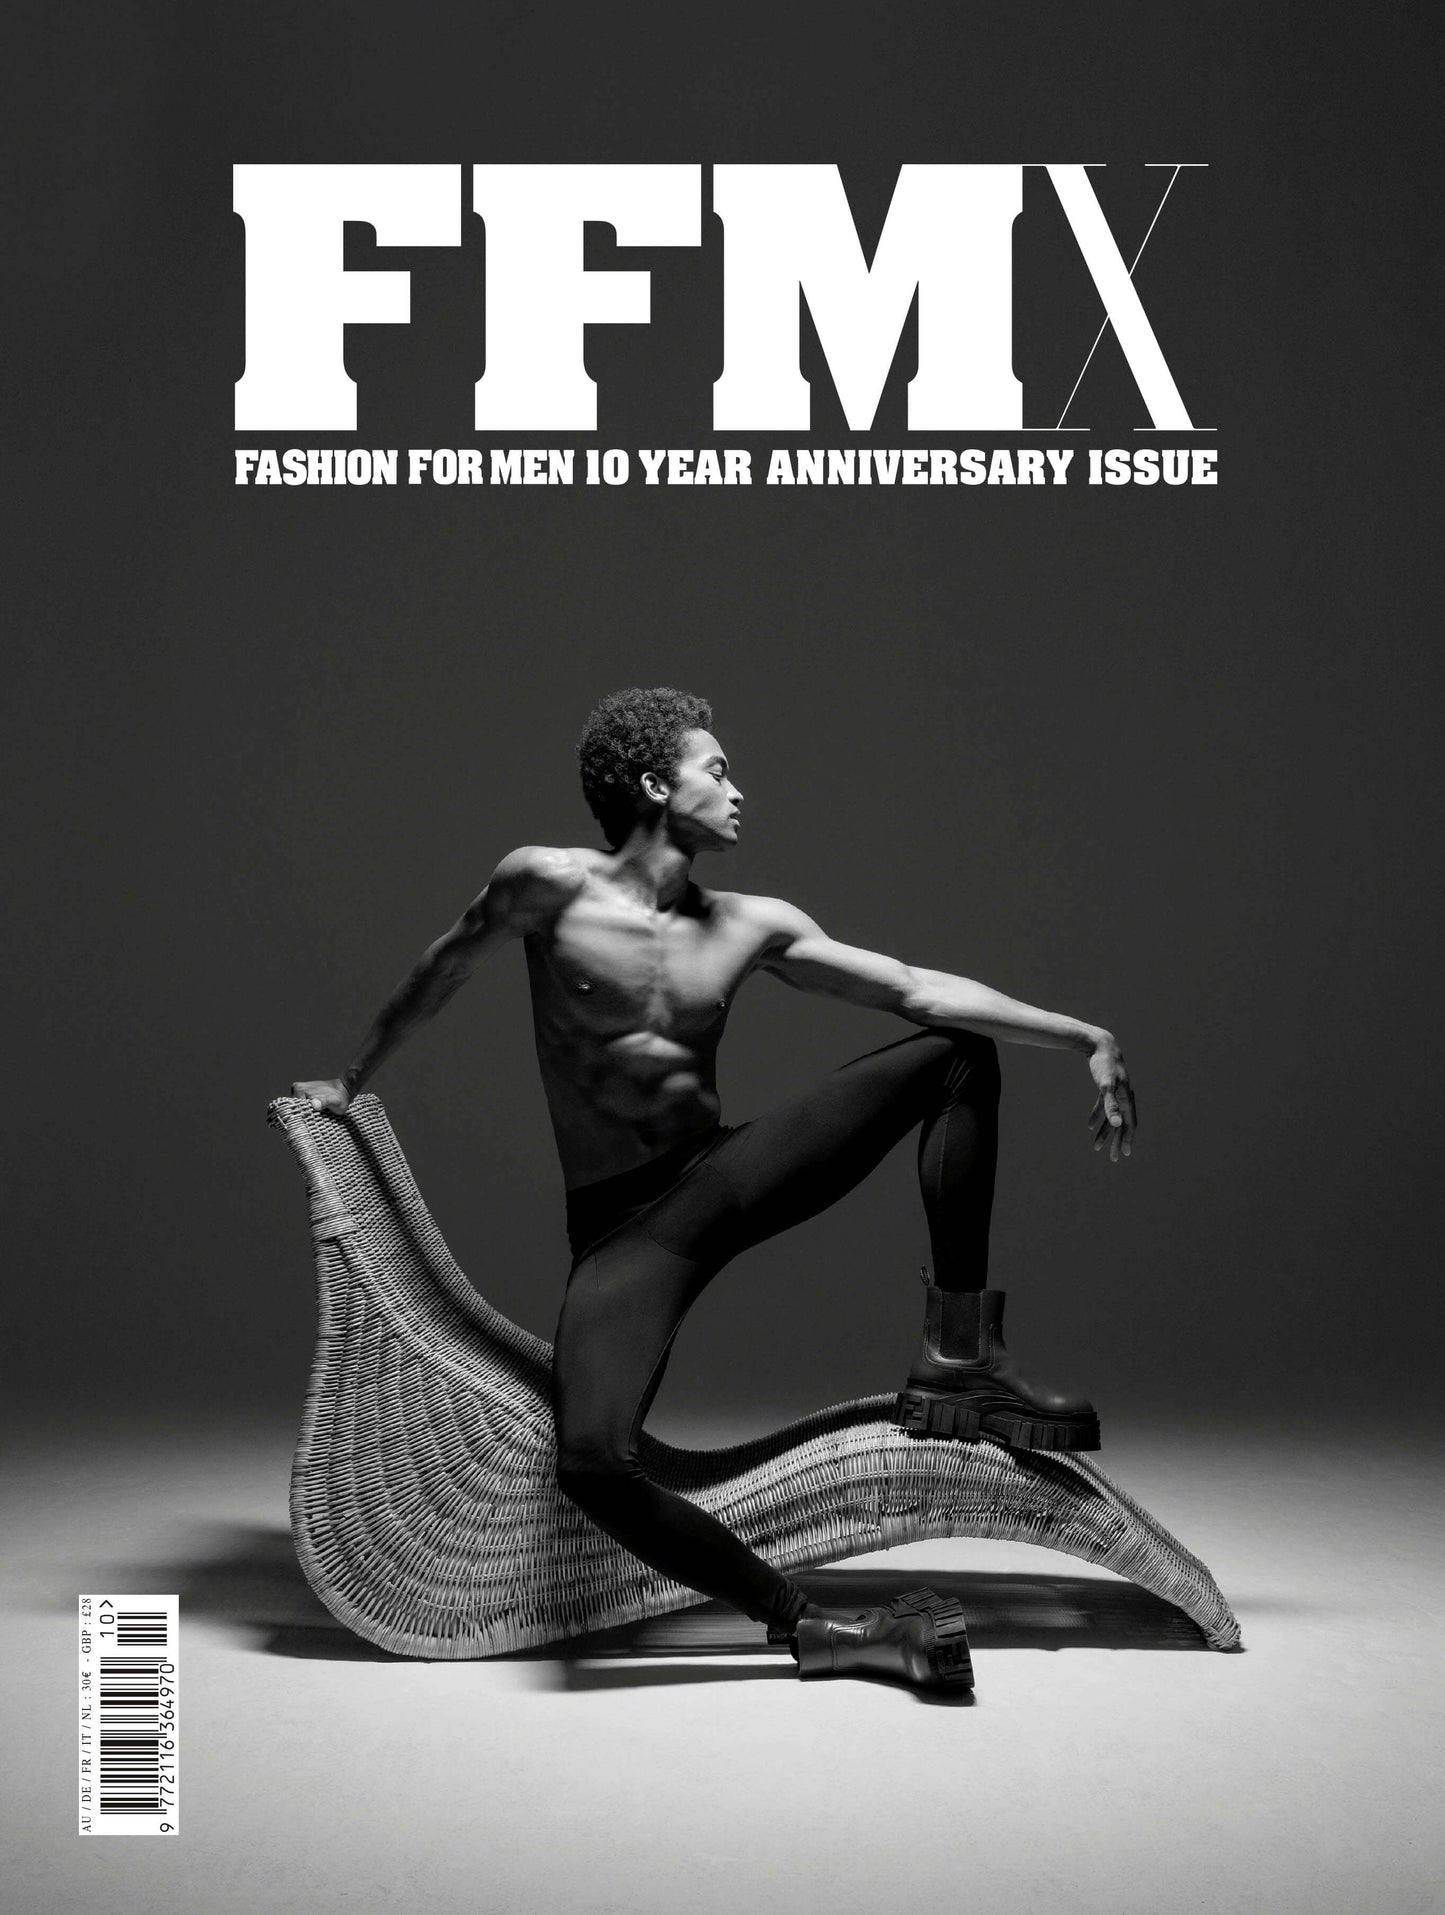 # 10 Year Anniversary Issue Fashion For Men